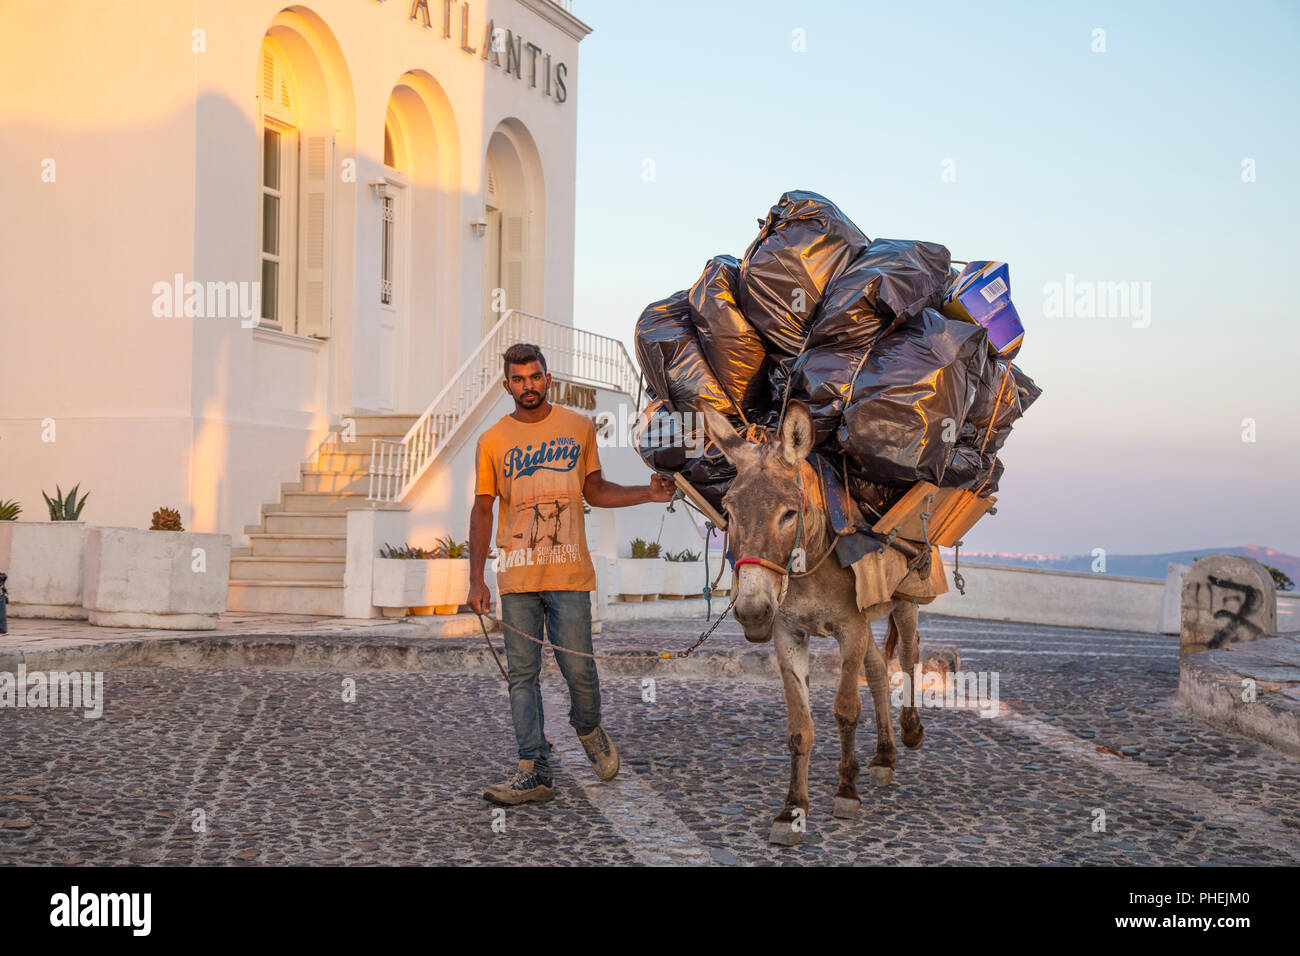 Local Greek man taking out the trash with donkey in Fira, Thira, Santorini Greece Stock Photo